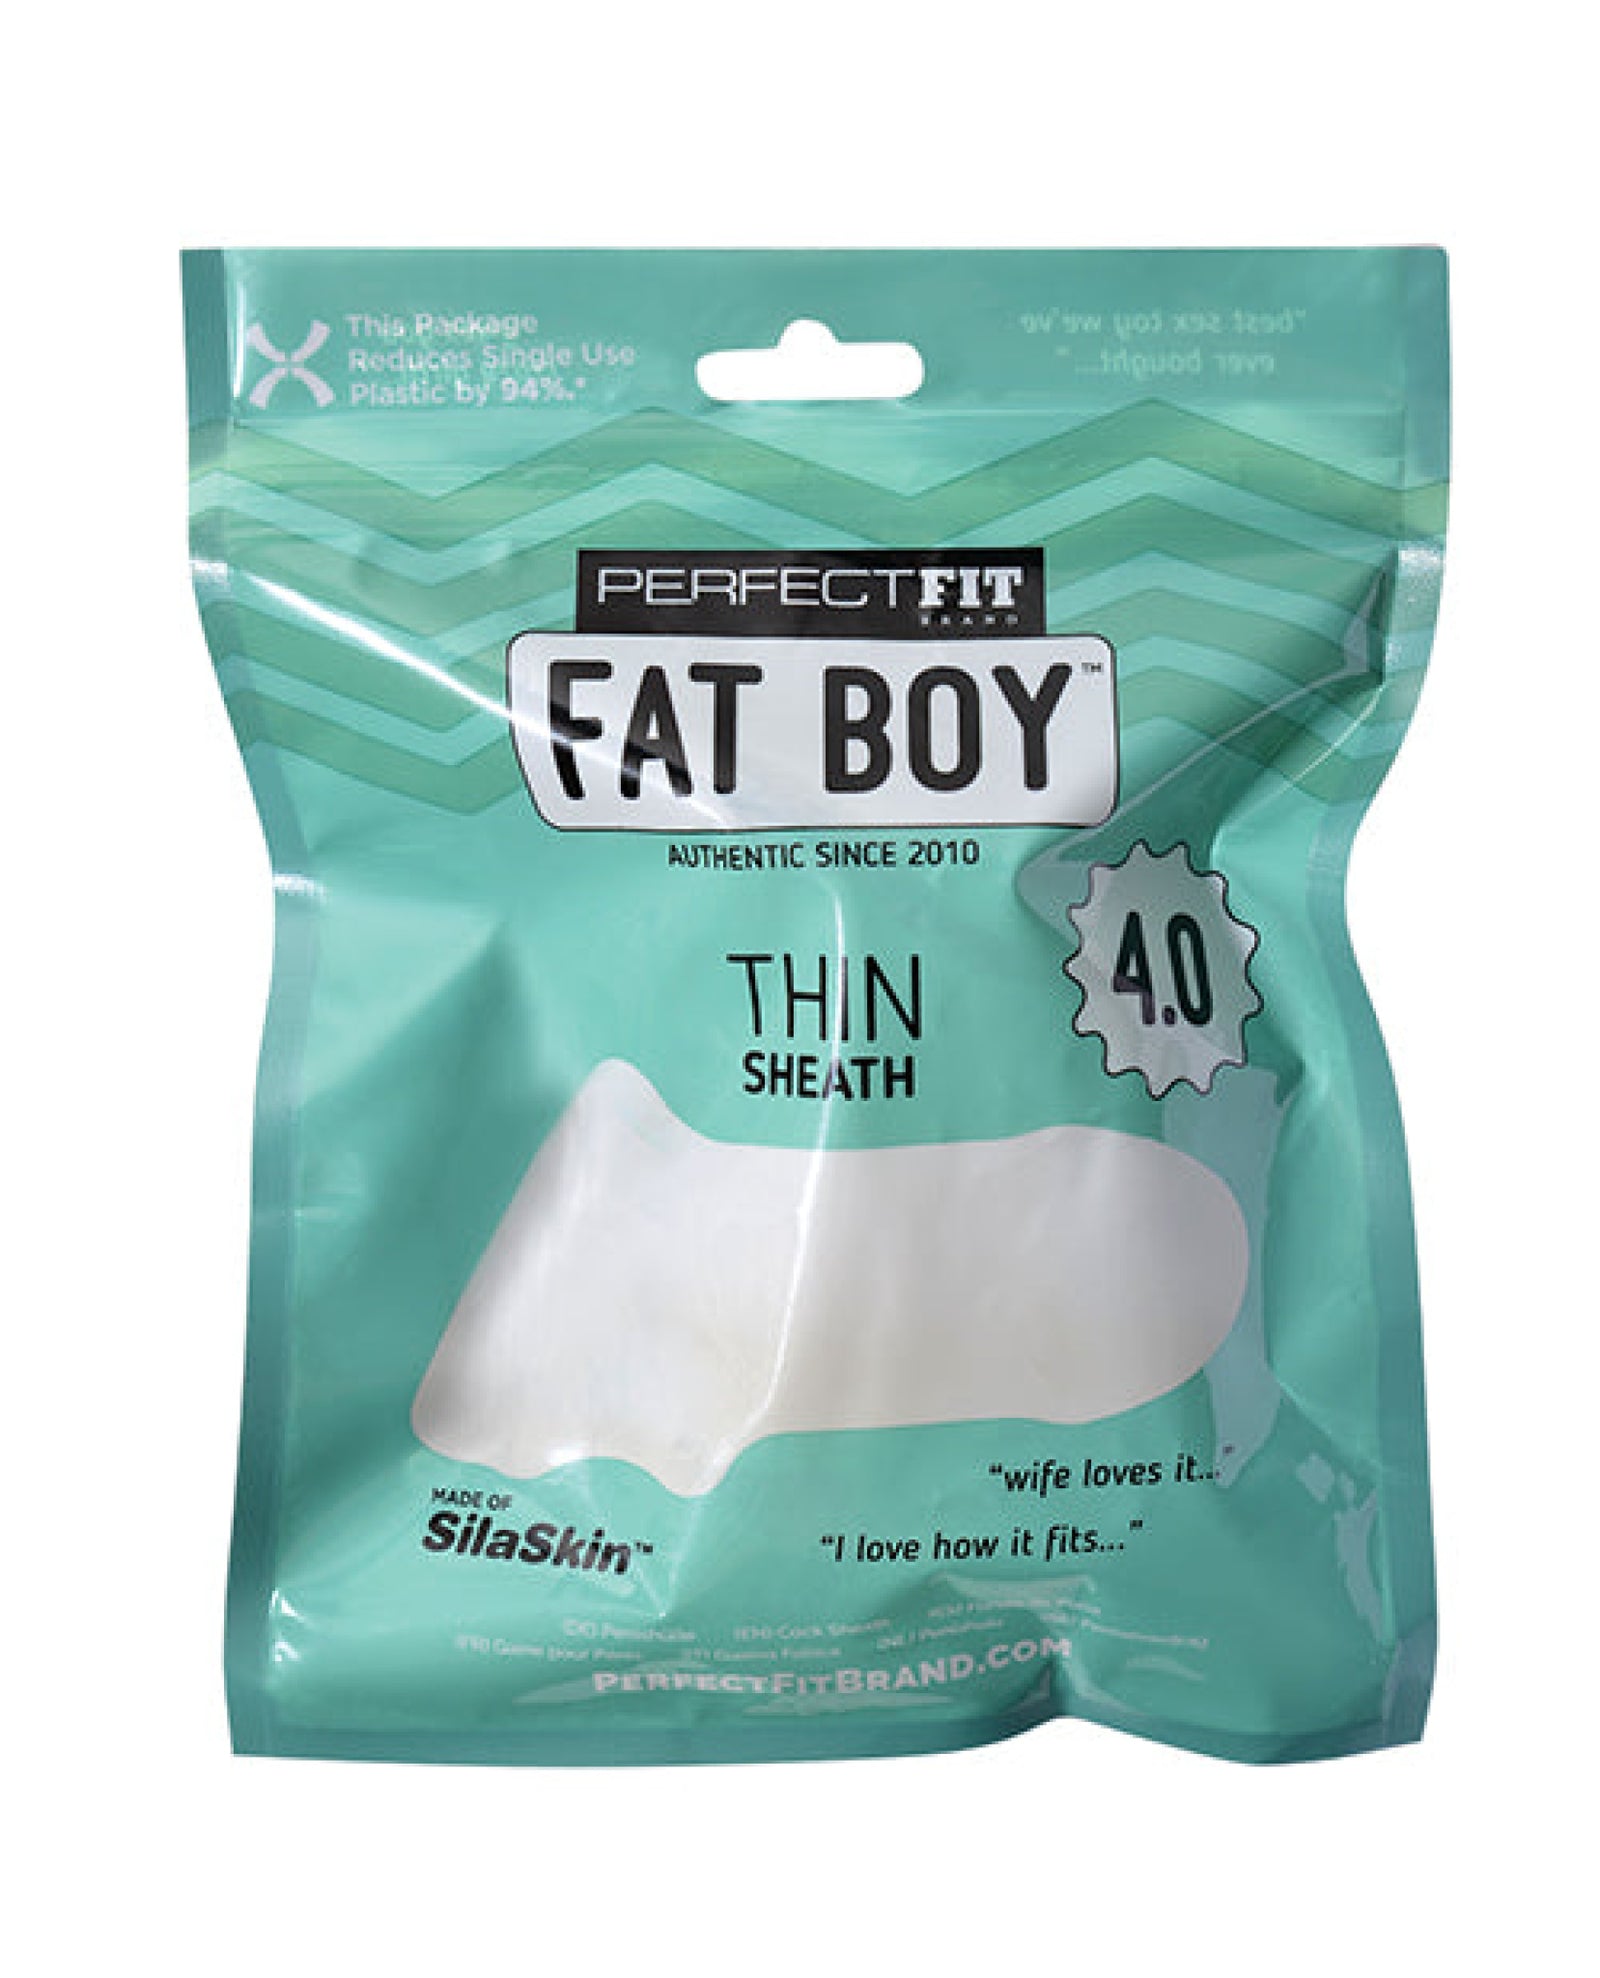 Perfect Fit Fat Boy Thin 4.0 - Clear Perfect Fit